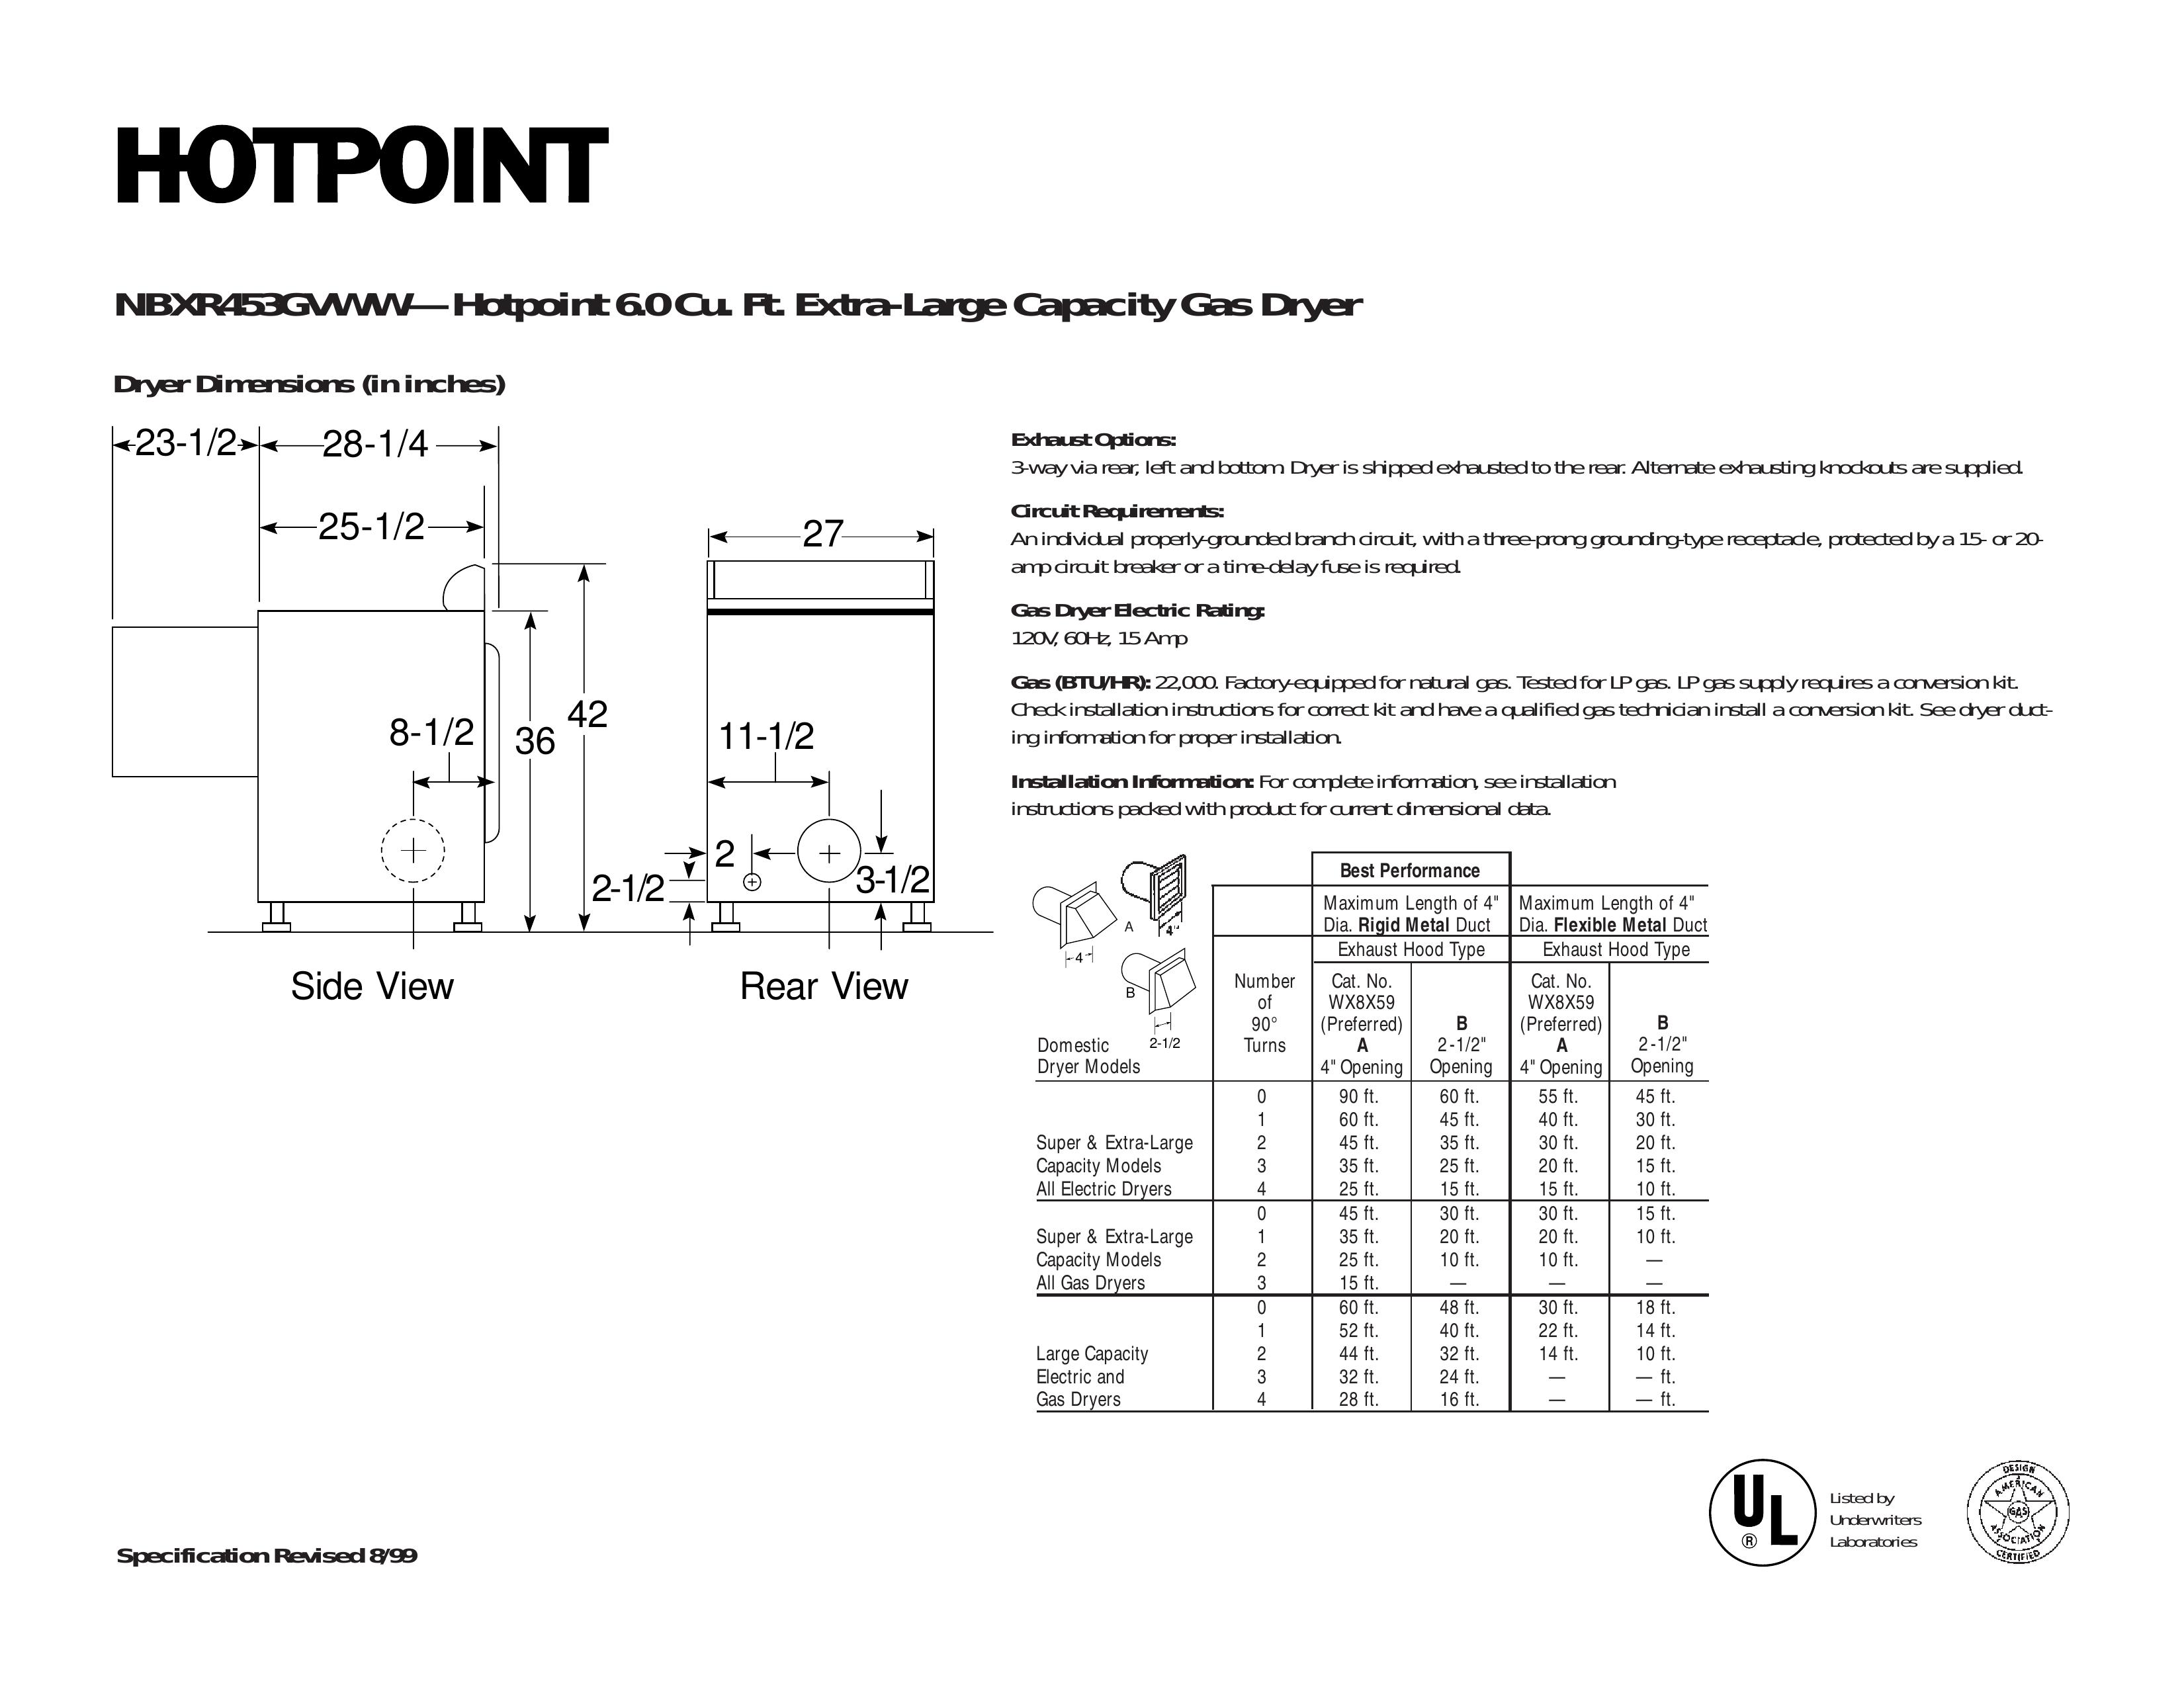 Hotpoint NBXR453GVAA Clothes Dryer User Manual